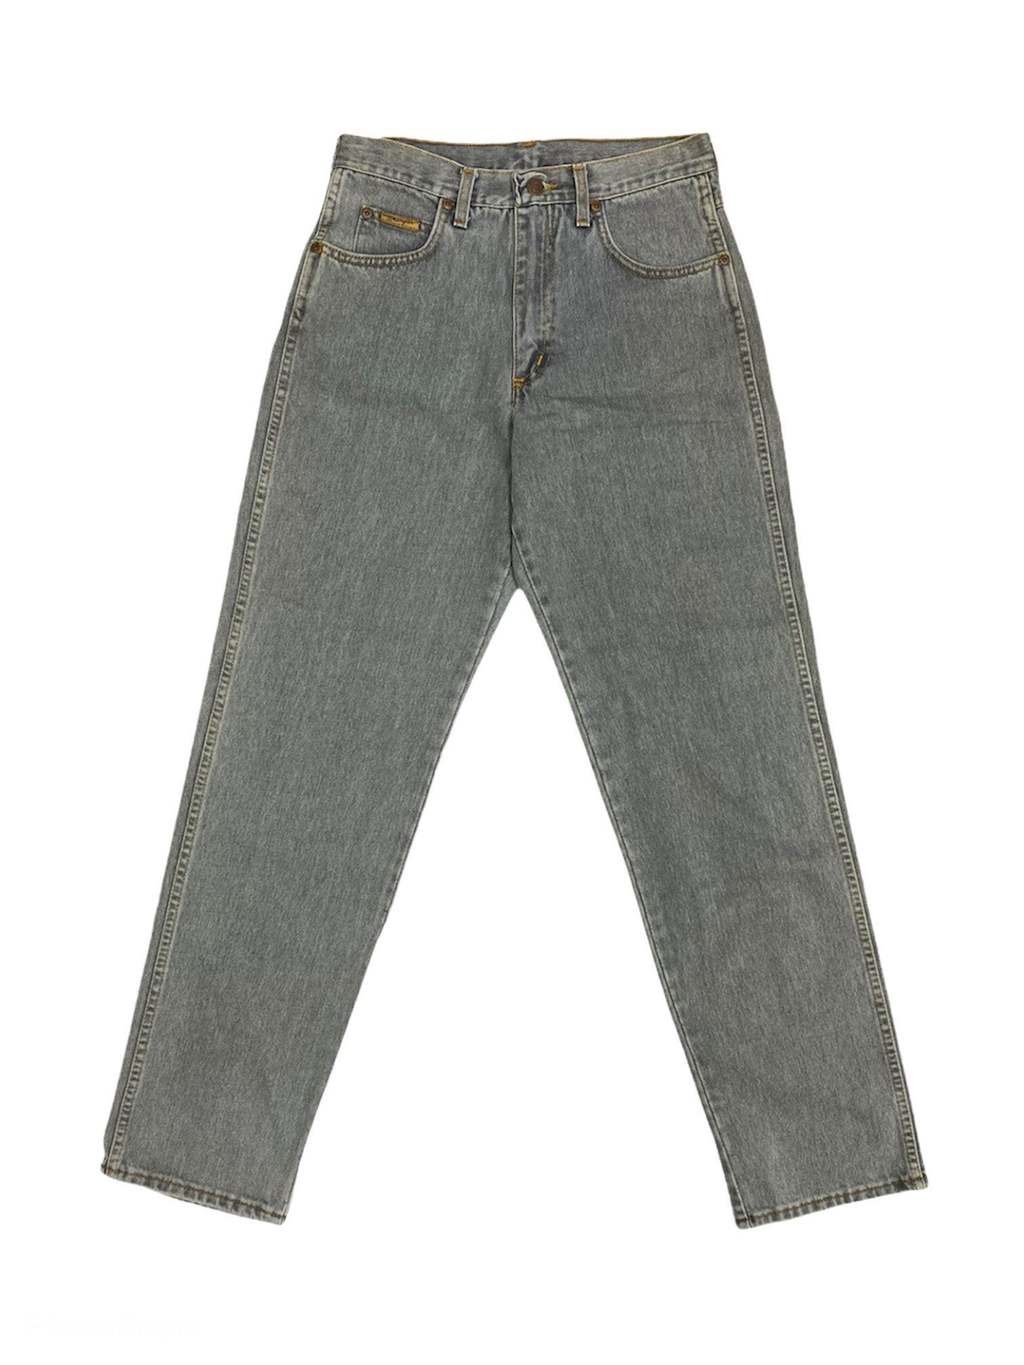 90s Vintage Wrangler Indiana jeans in grey, made in the UK, deadstock - W29  x L32 - St Cyr Vintage